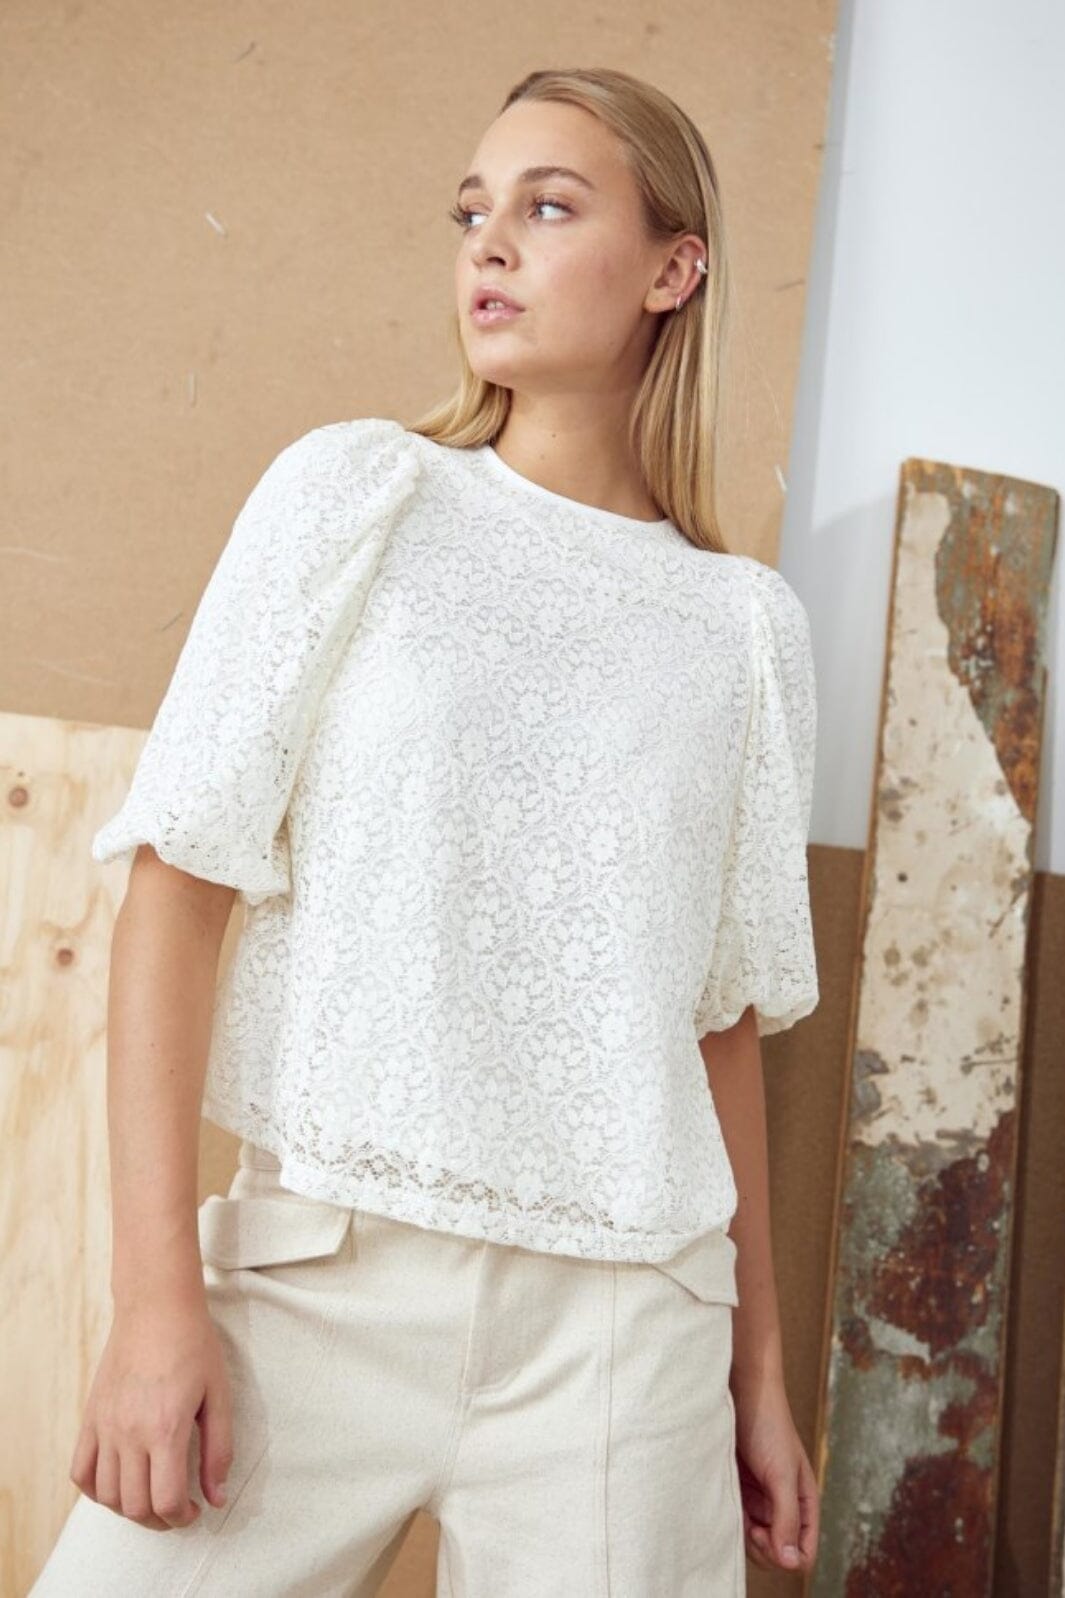 Noella - Shelly Blouse - 006 Offwhite Bluser 